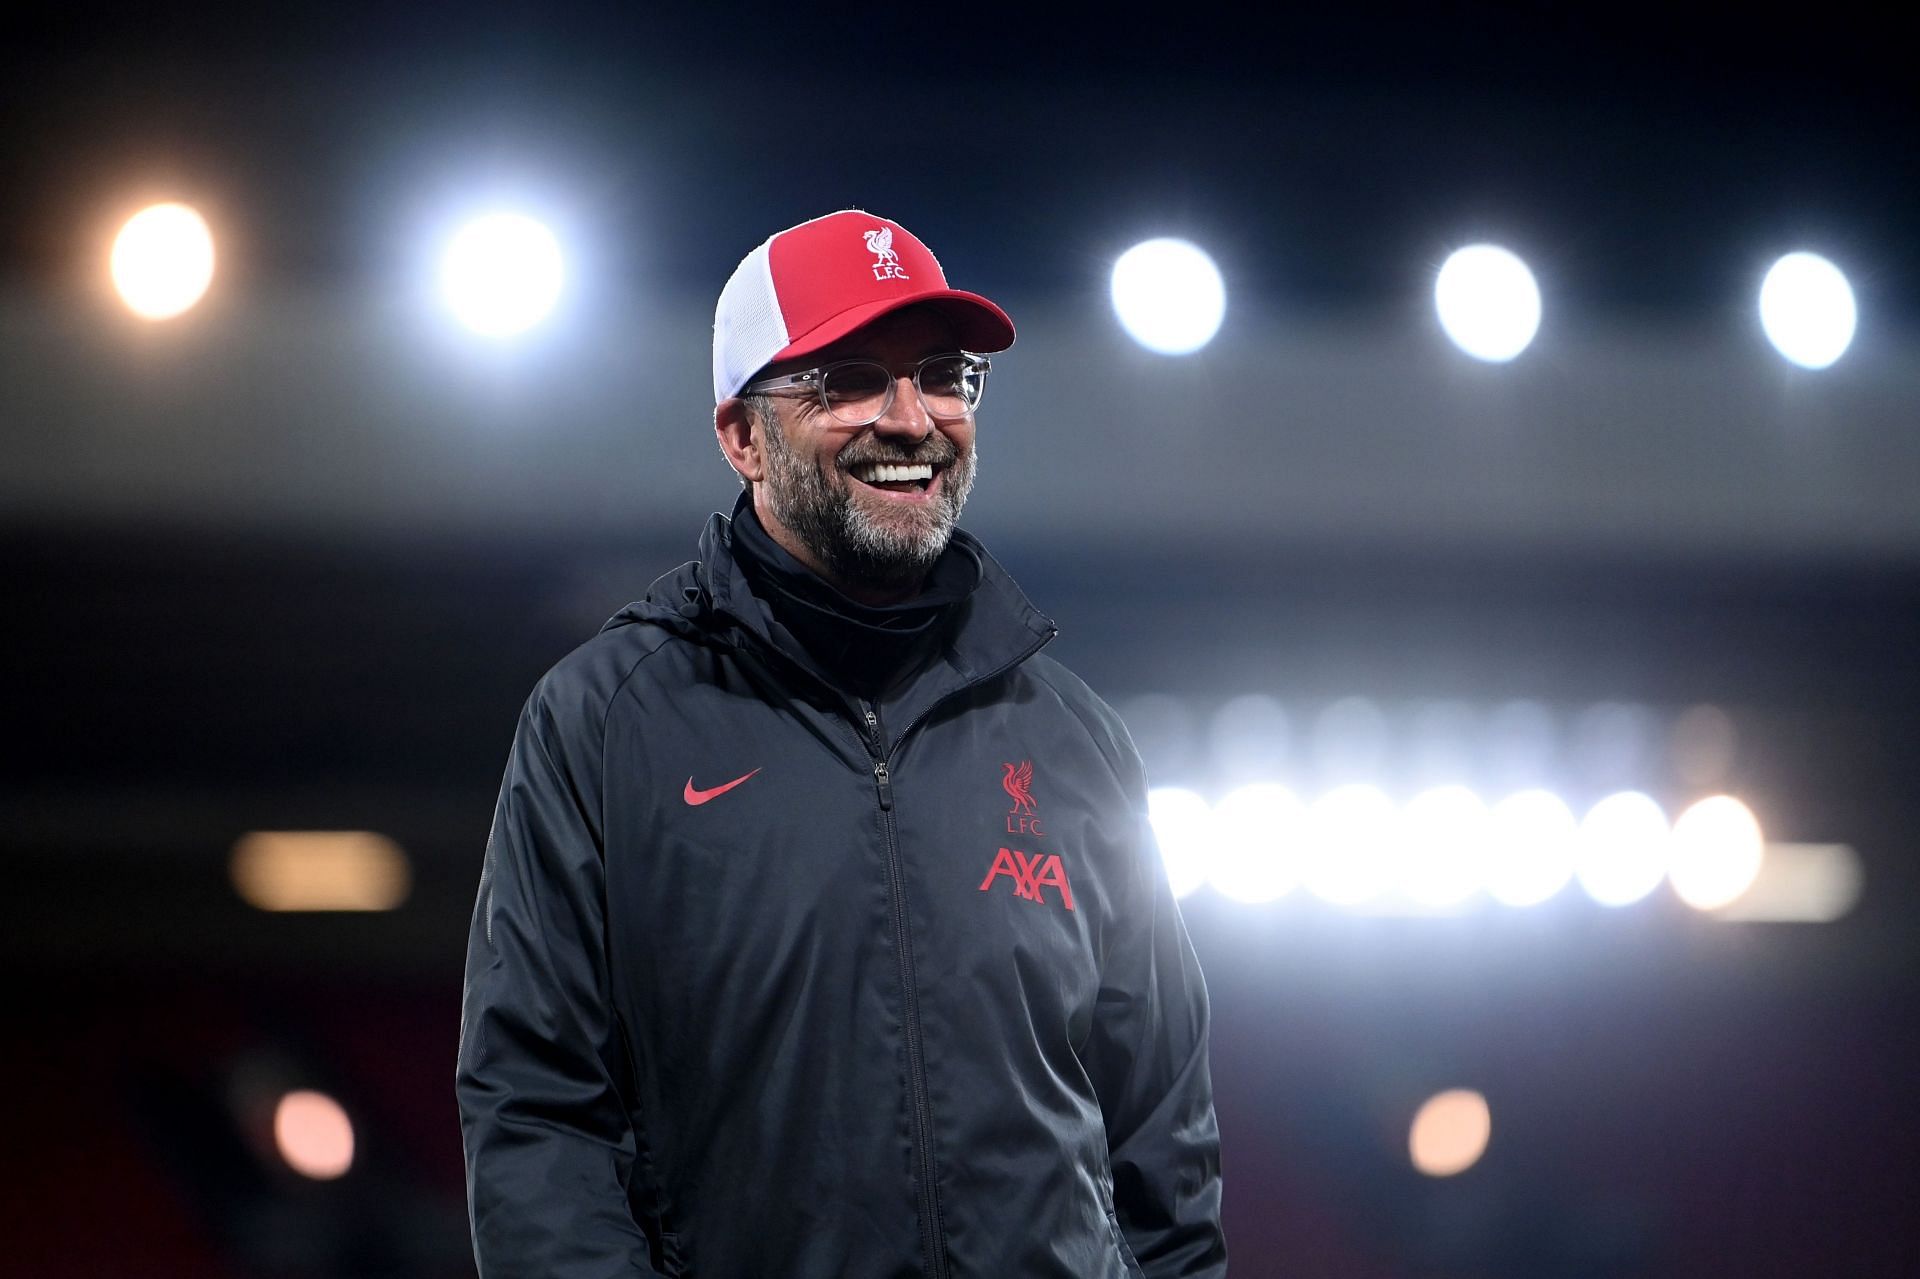 Jurgen Klopp is an attacking-minded manager